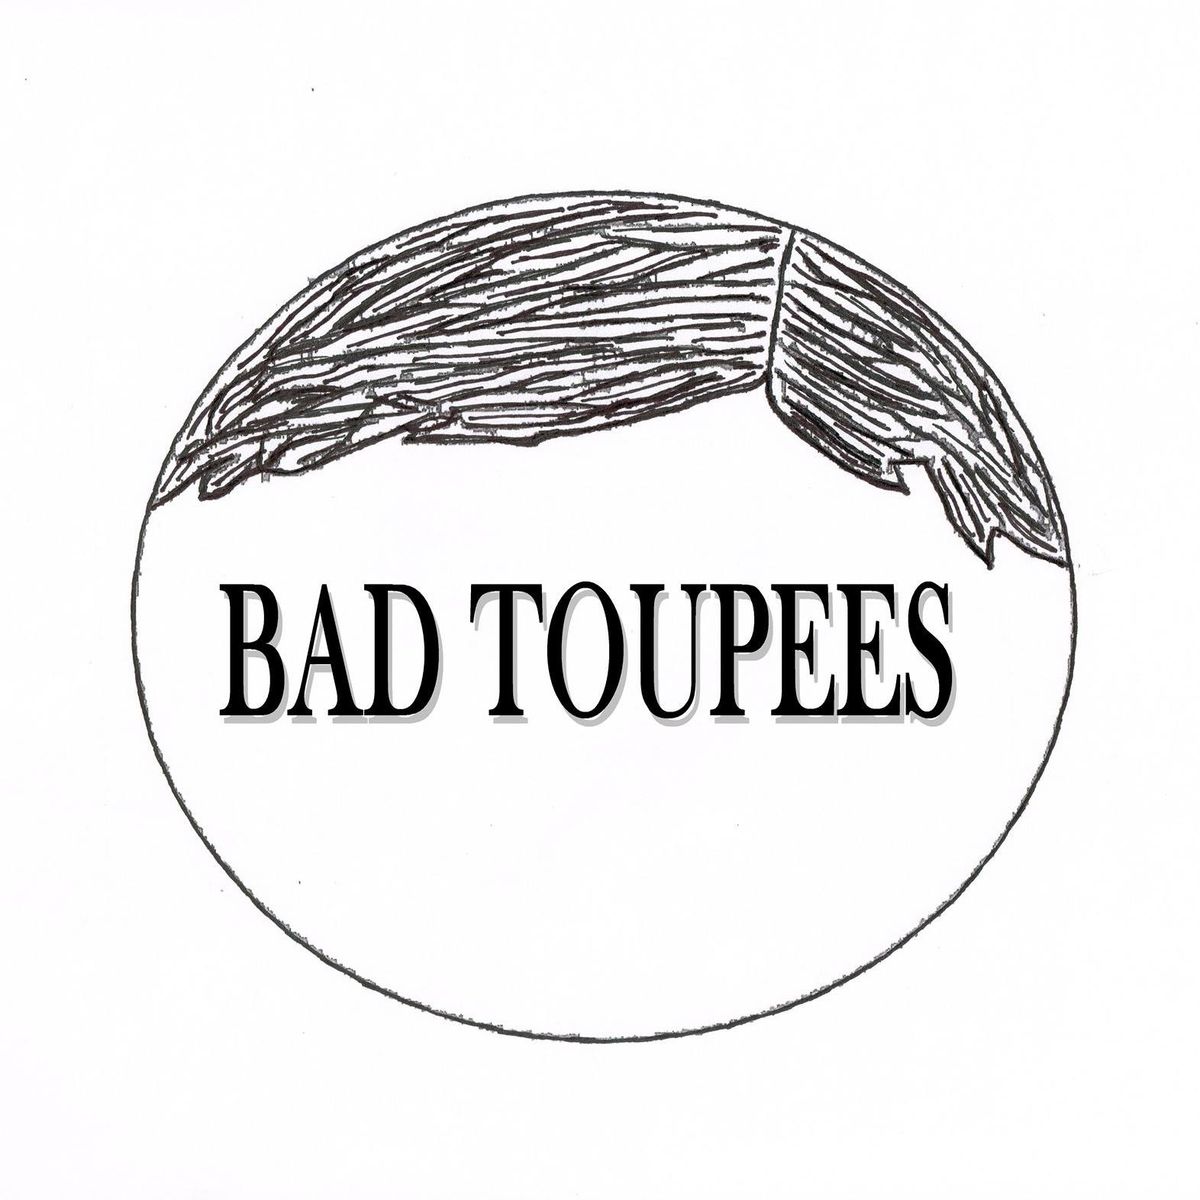 EVENTS AT THE BARN FEATURING BAD TOUPEES